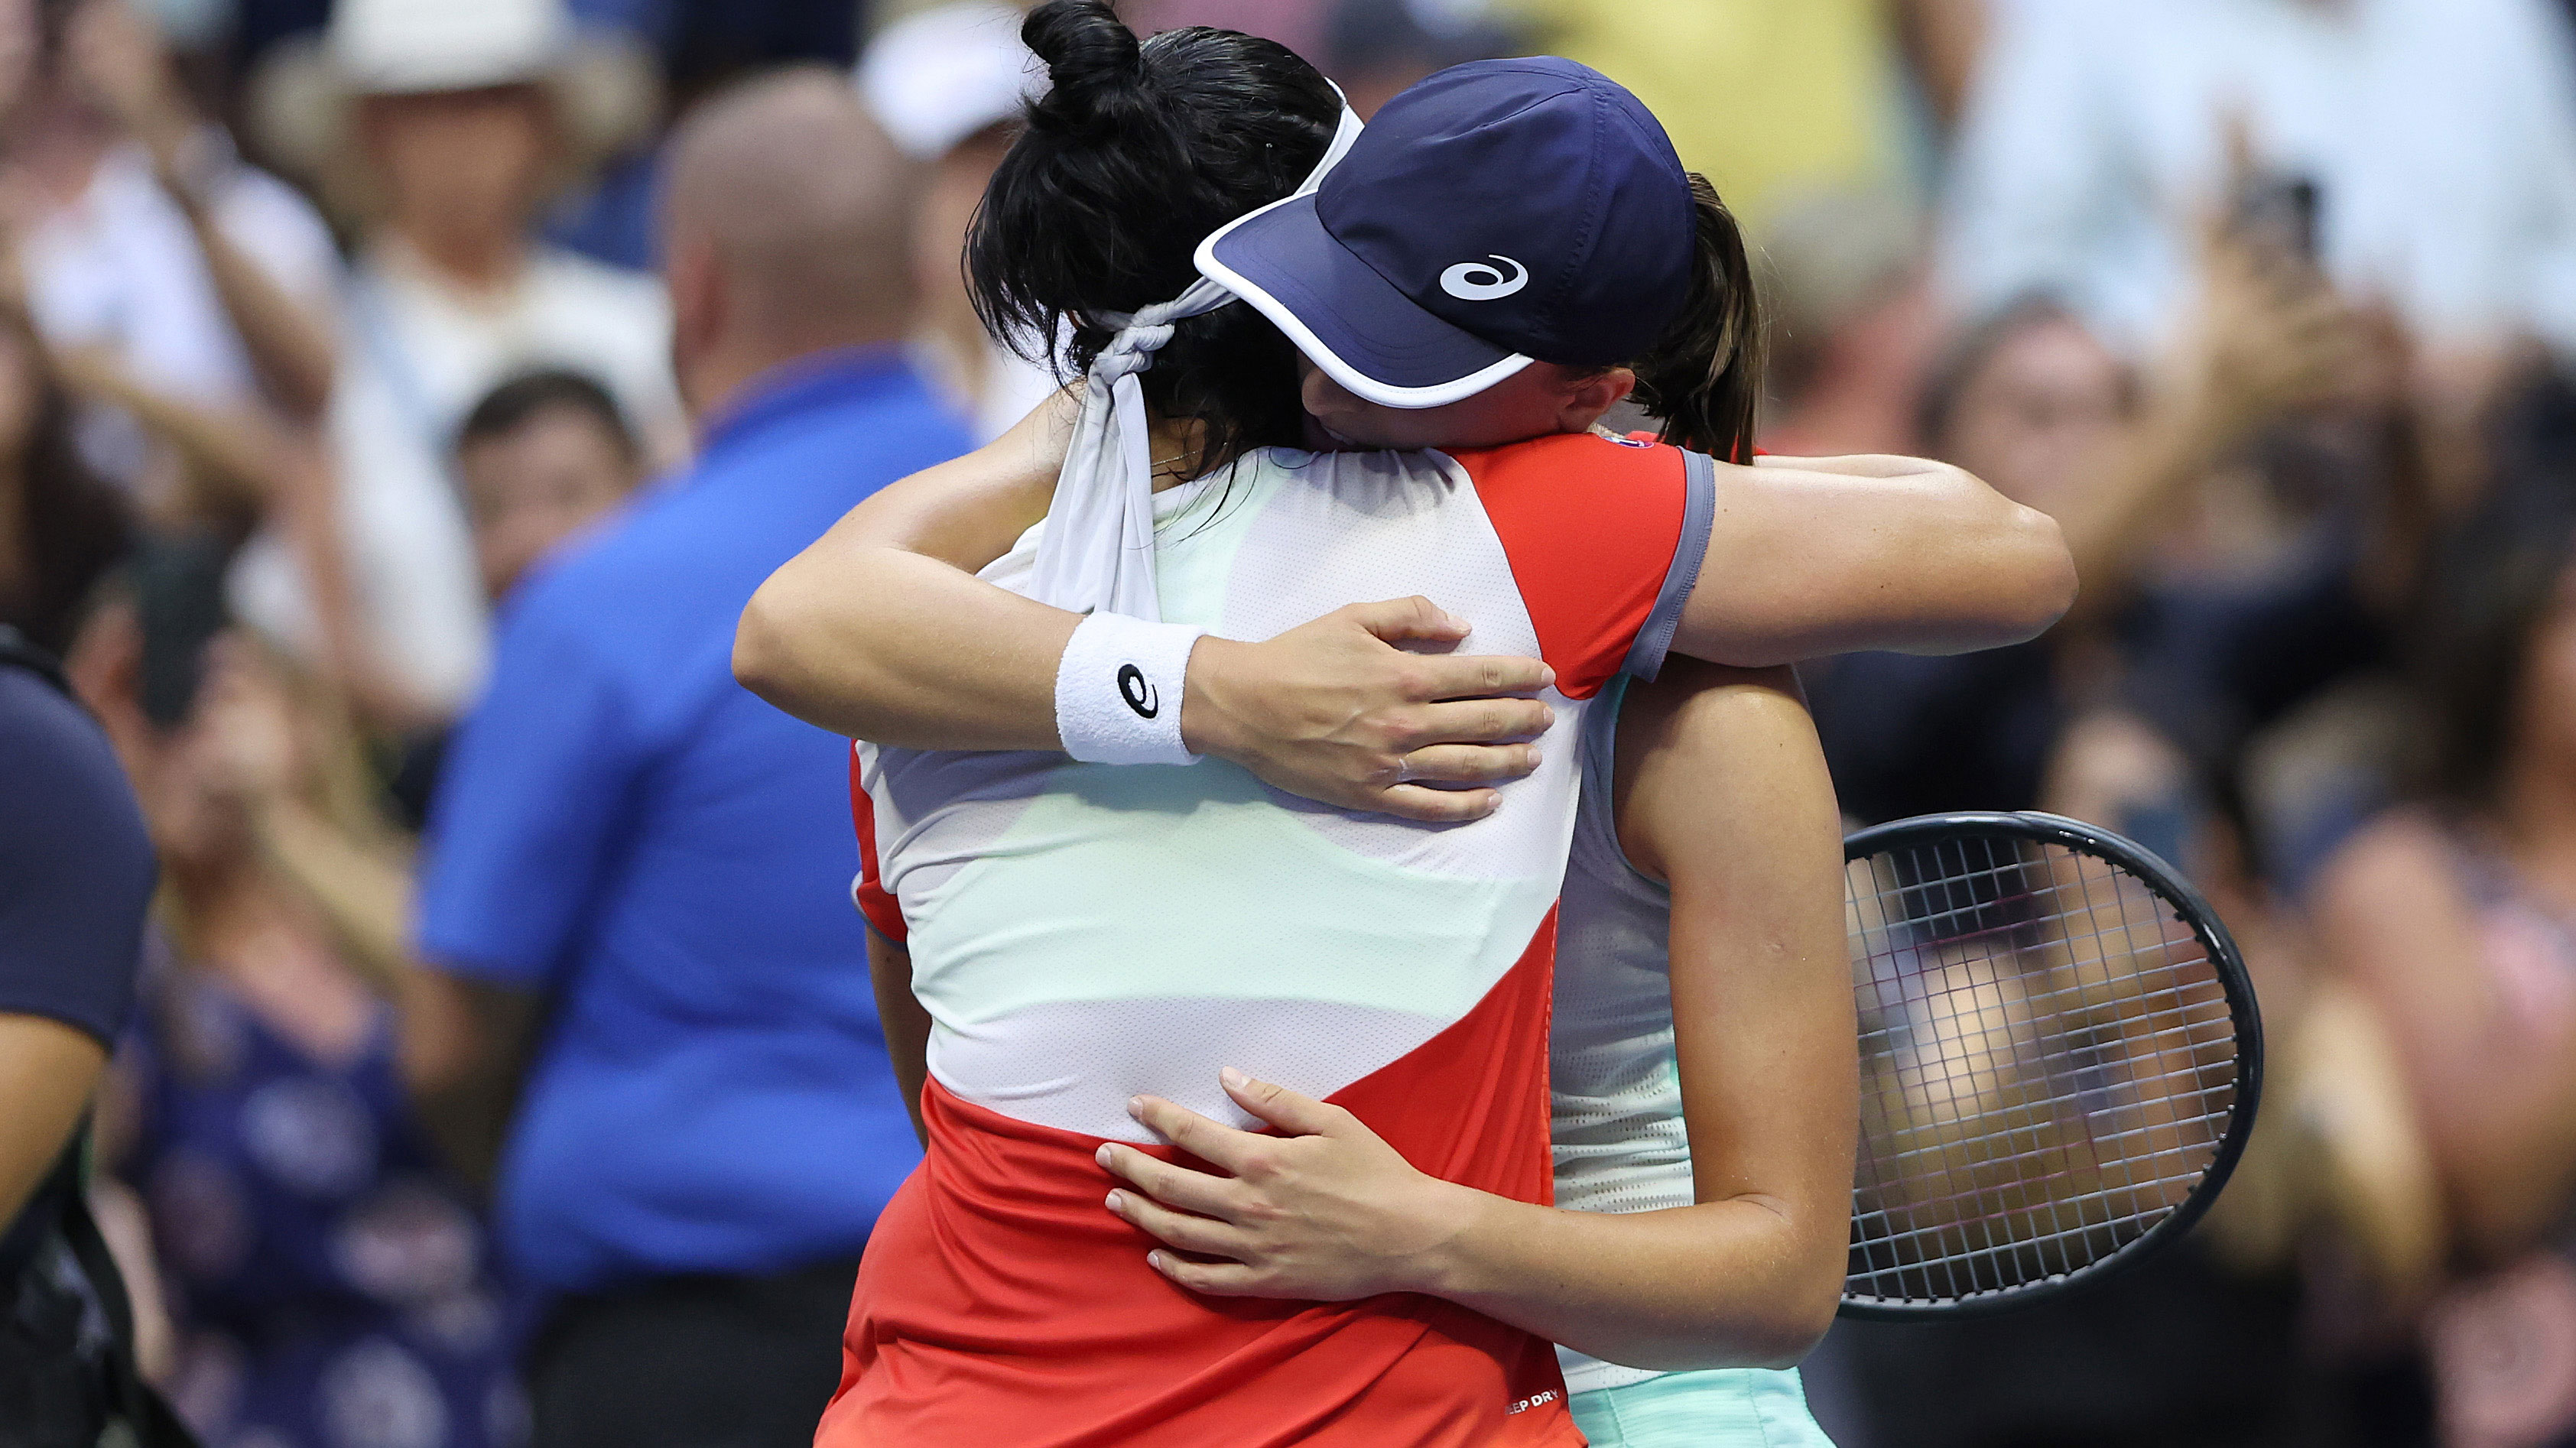 Iga Swiatek of Poland hugs Ons Jabeur of Tunisia after the world No.1 hung on to win the US Open in straight sets.